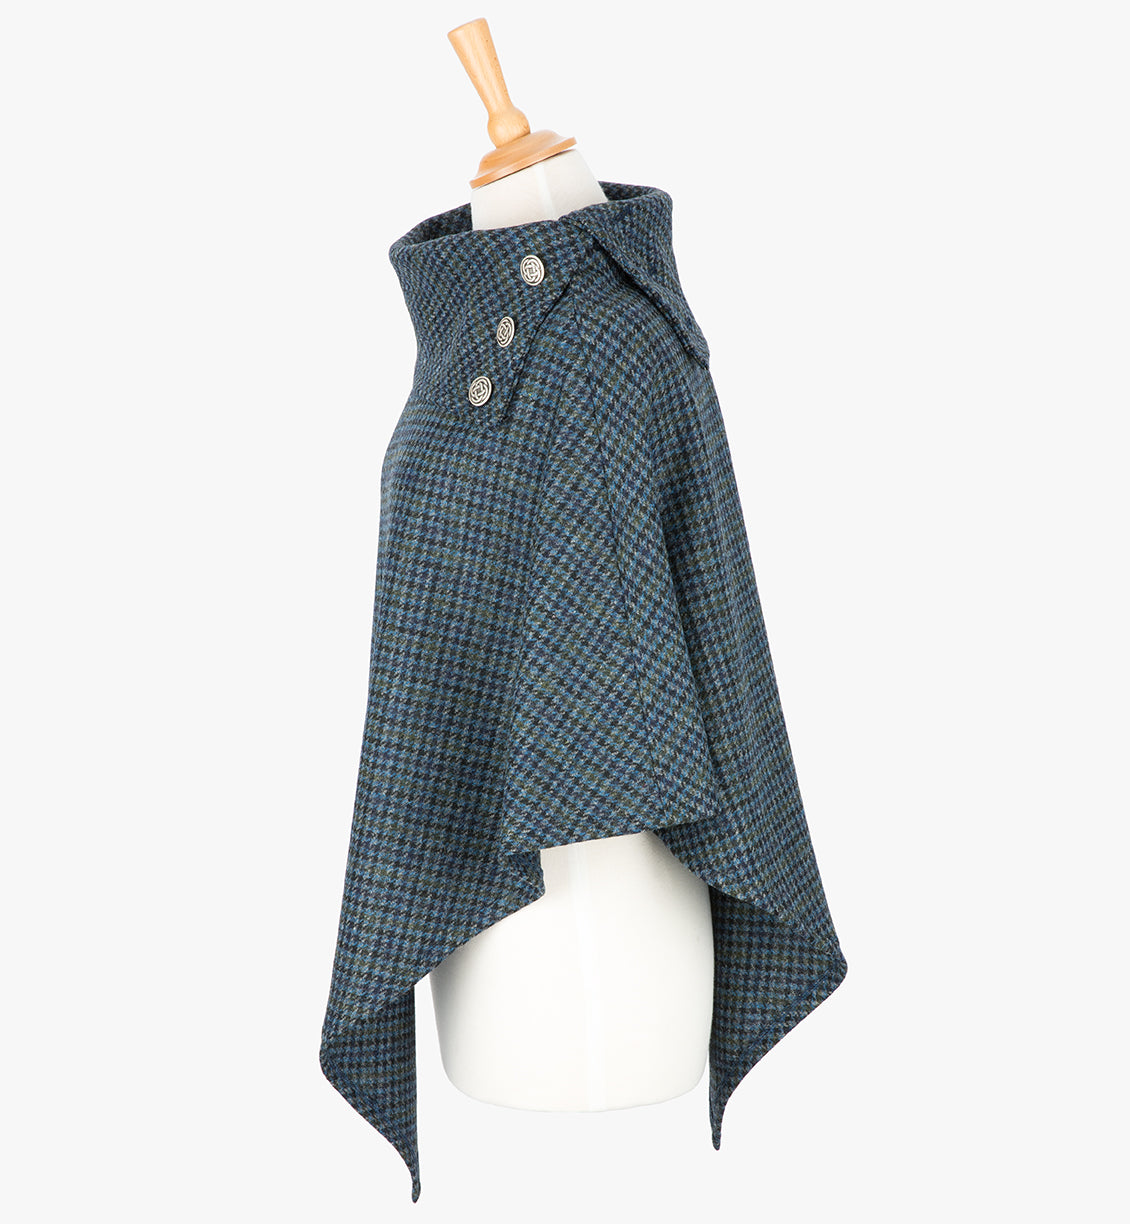 Side view the poncho in mid-blue and black small houndstooth check. It drops over the head and drapes gently over the shoulders. It comes mid-way down the arms and finishes at a point at the front. It has a folded collar with 3 Celtic buttons in silver on the right hand side.